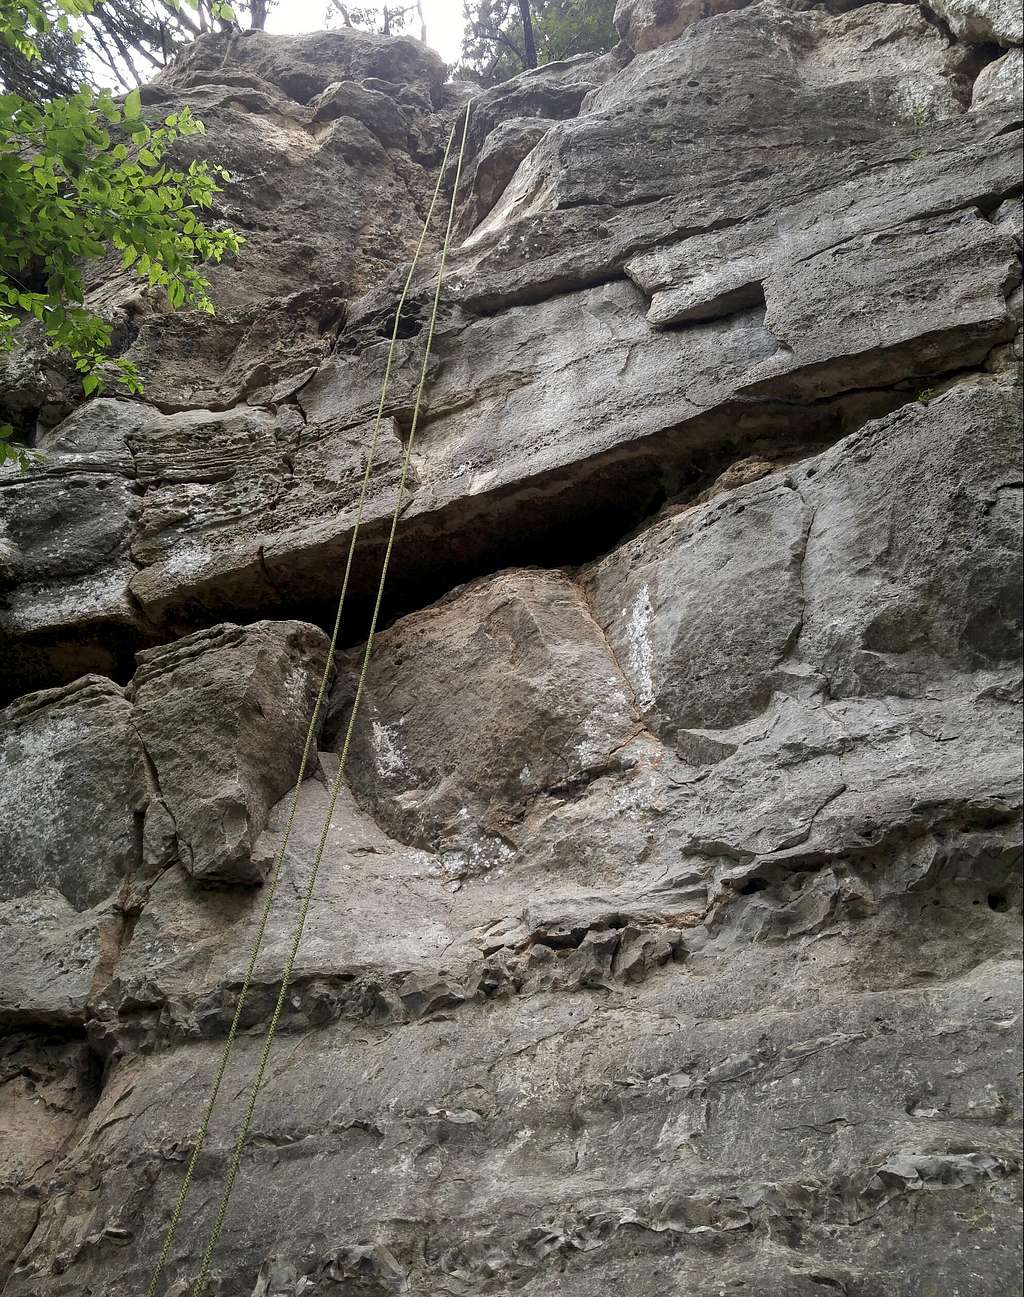 Thin Crack (5.6) and Stand Off (5.8)